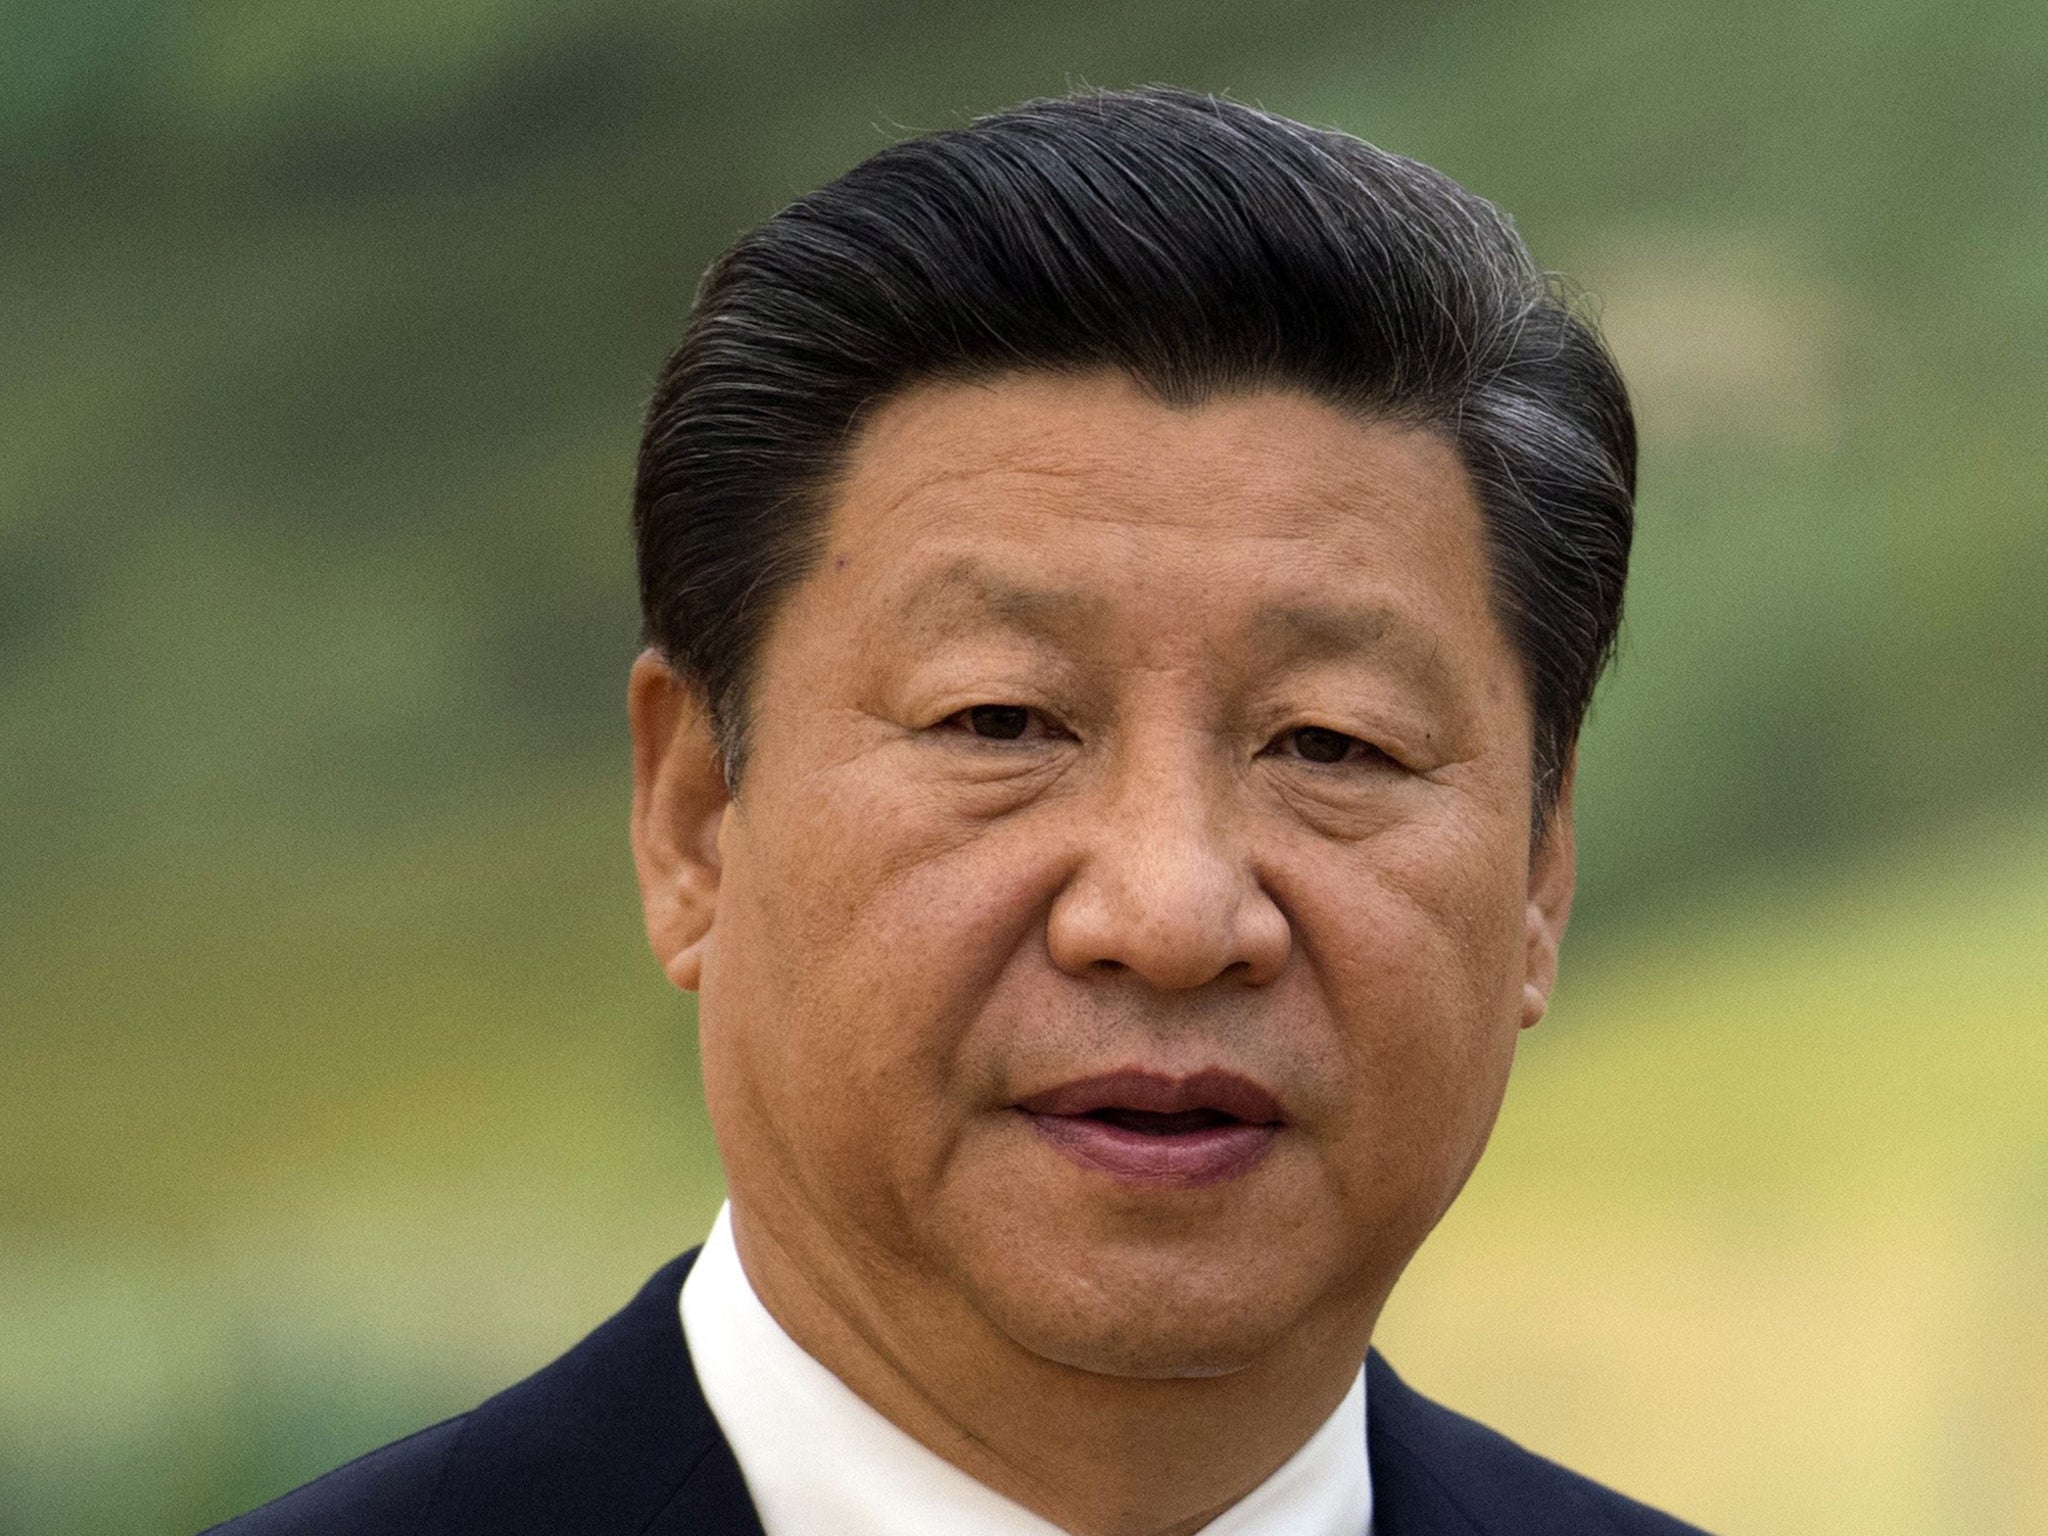 President Xi Jinping stay at Buckingham Palace during the three-day visit